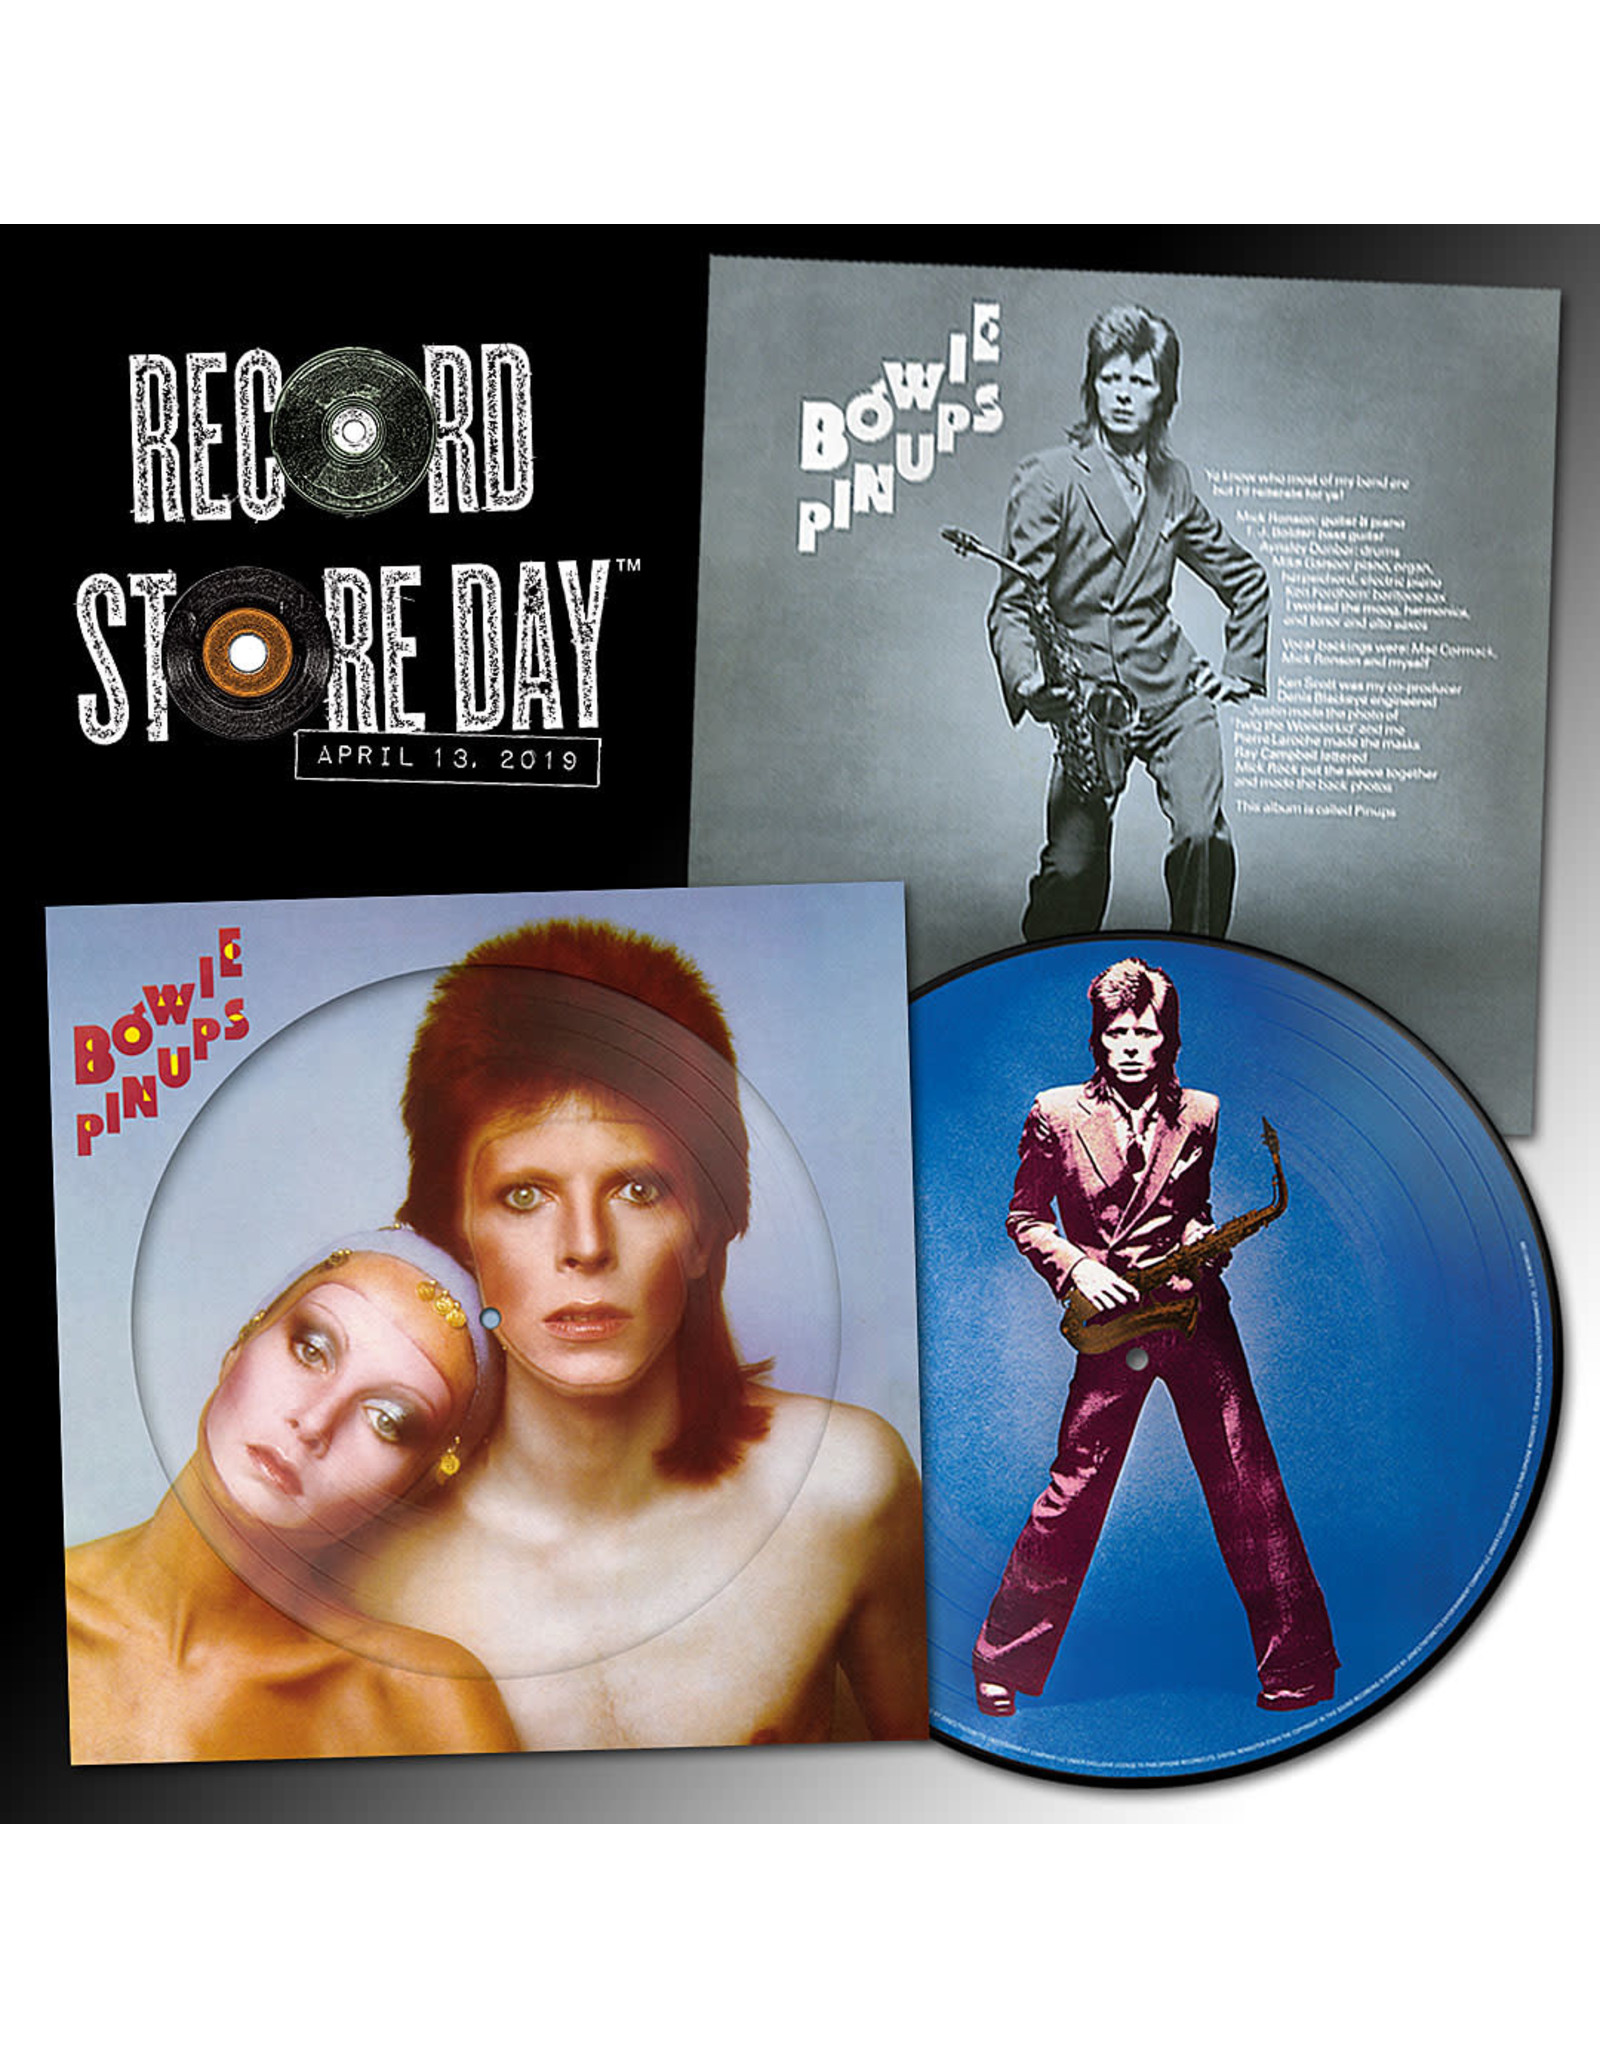 David Bowie - Pin Ups [Picture Disc]